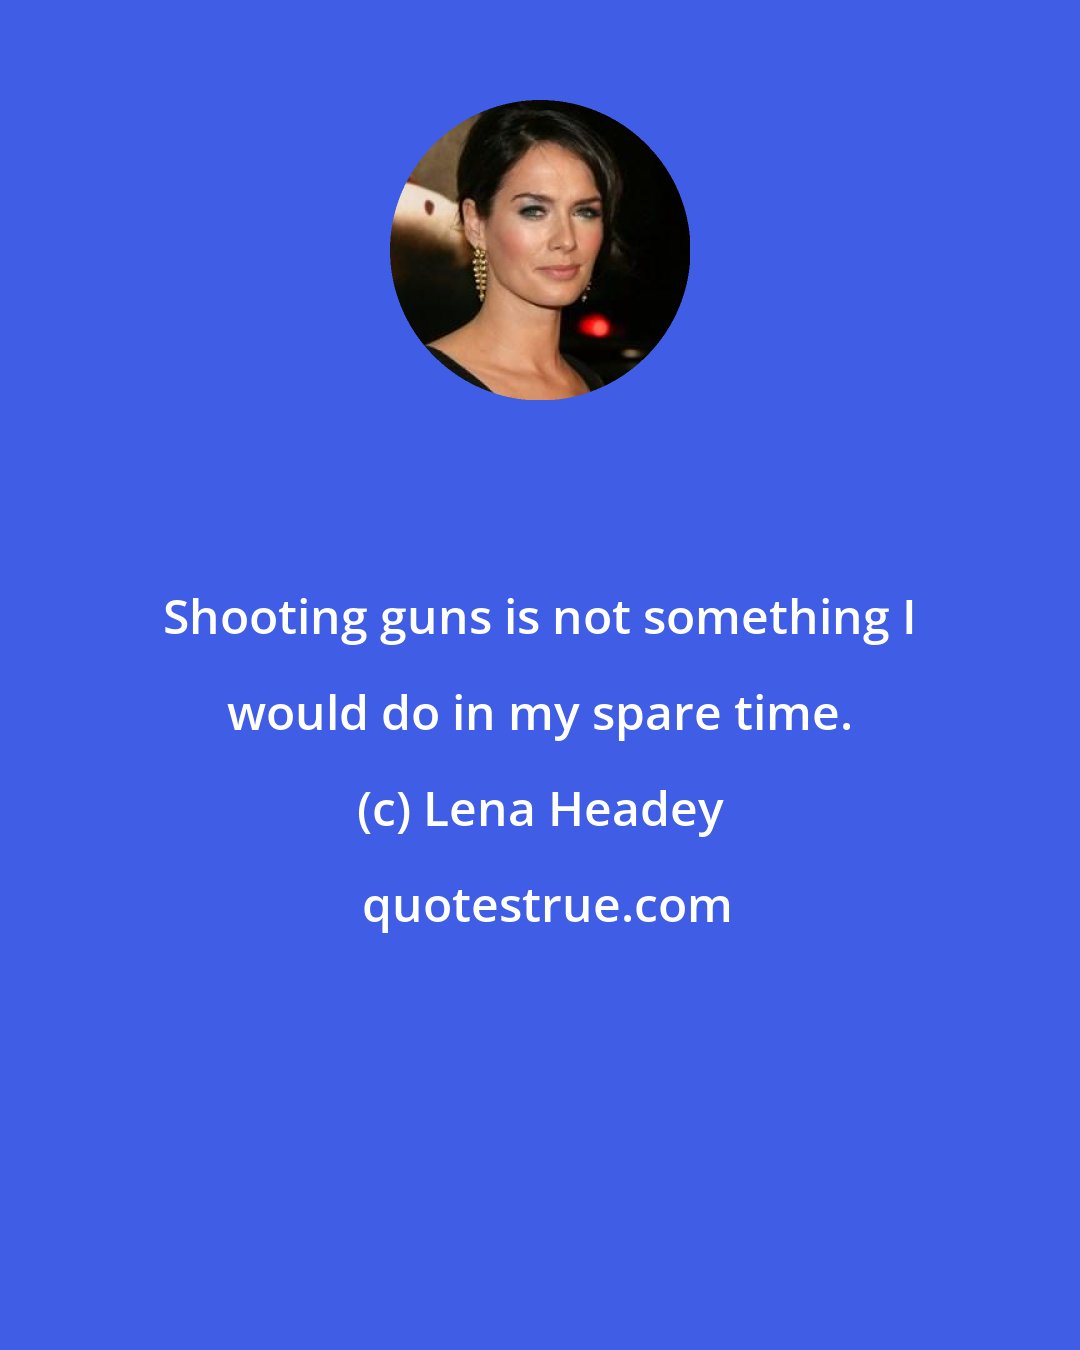 Lena Headey: Shooting guns is not something I would do in my spare time.